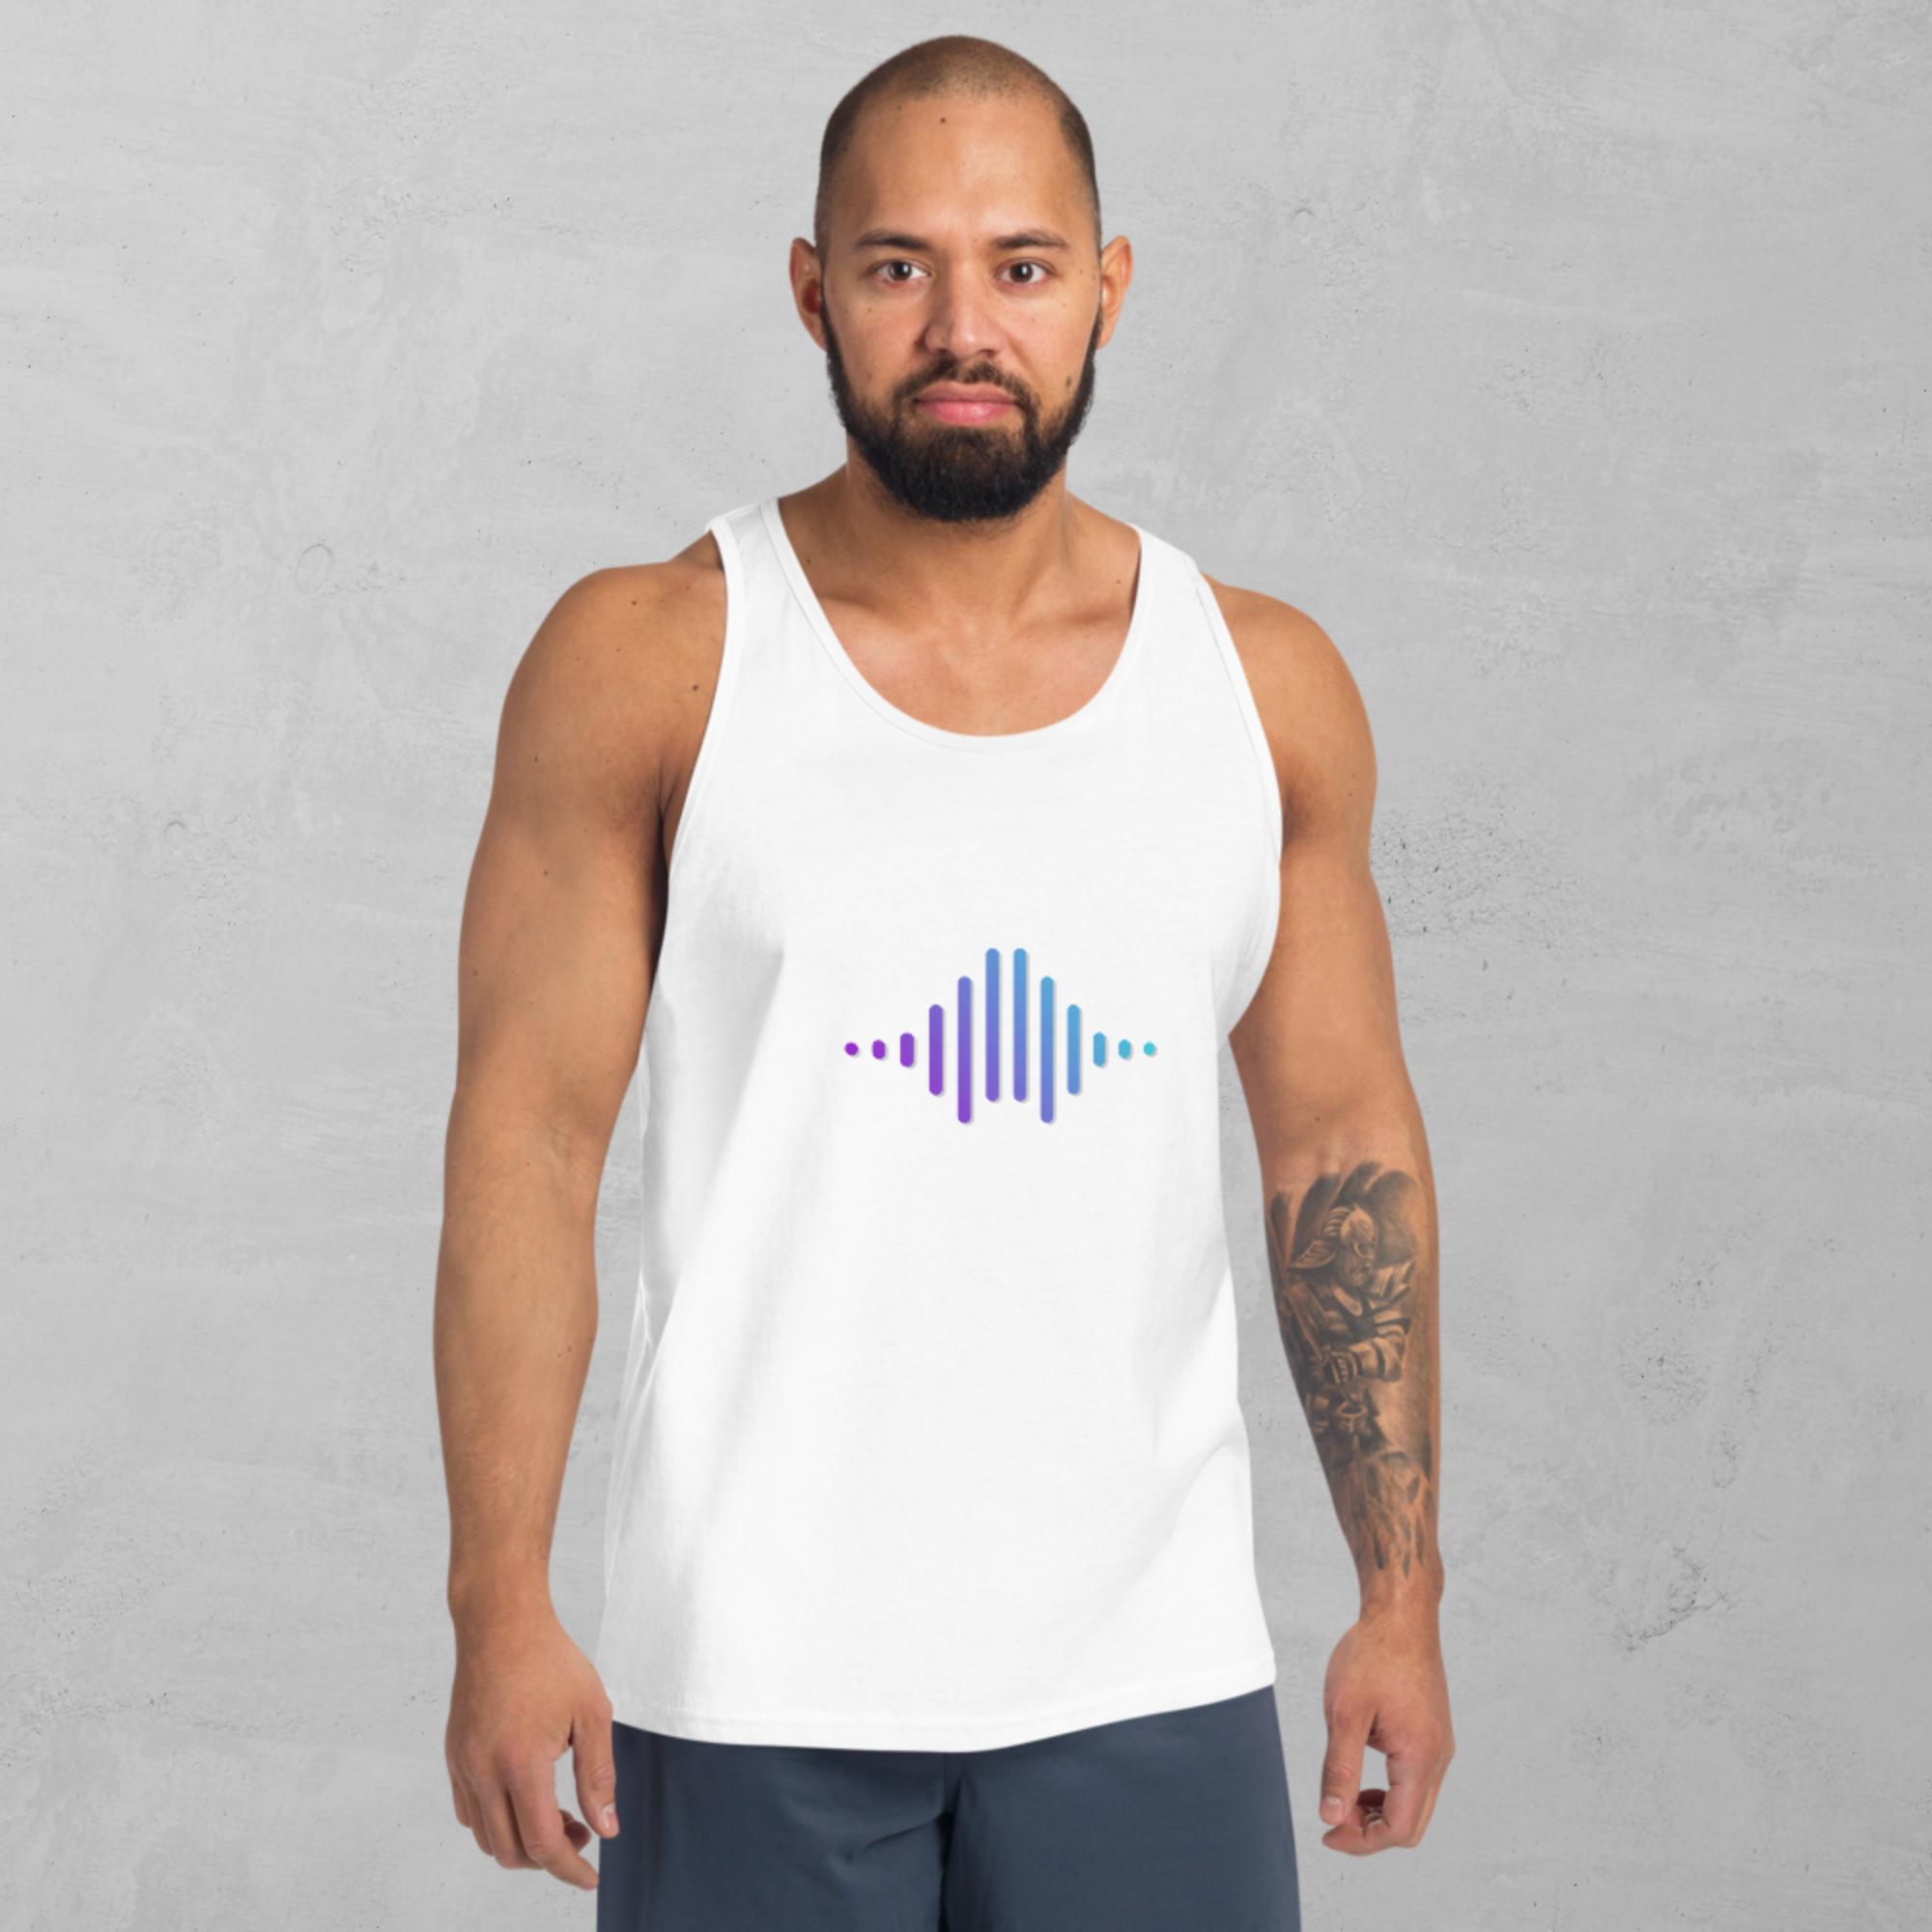 mens-staple-tank-top-white-front-6388f8a1bc200.jpg